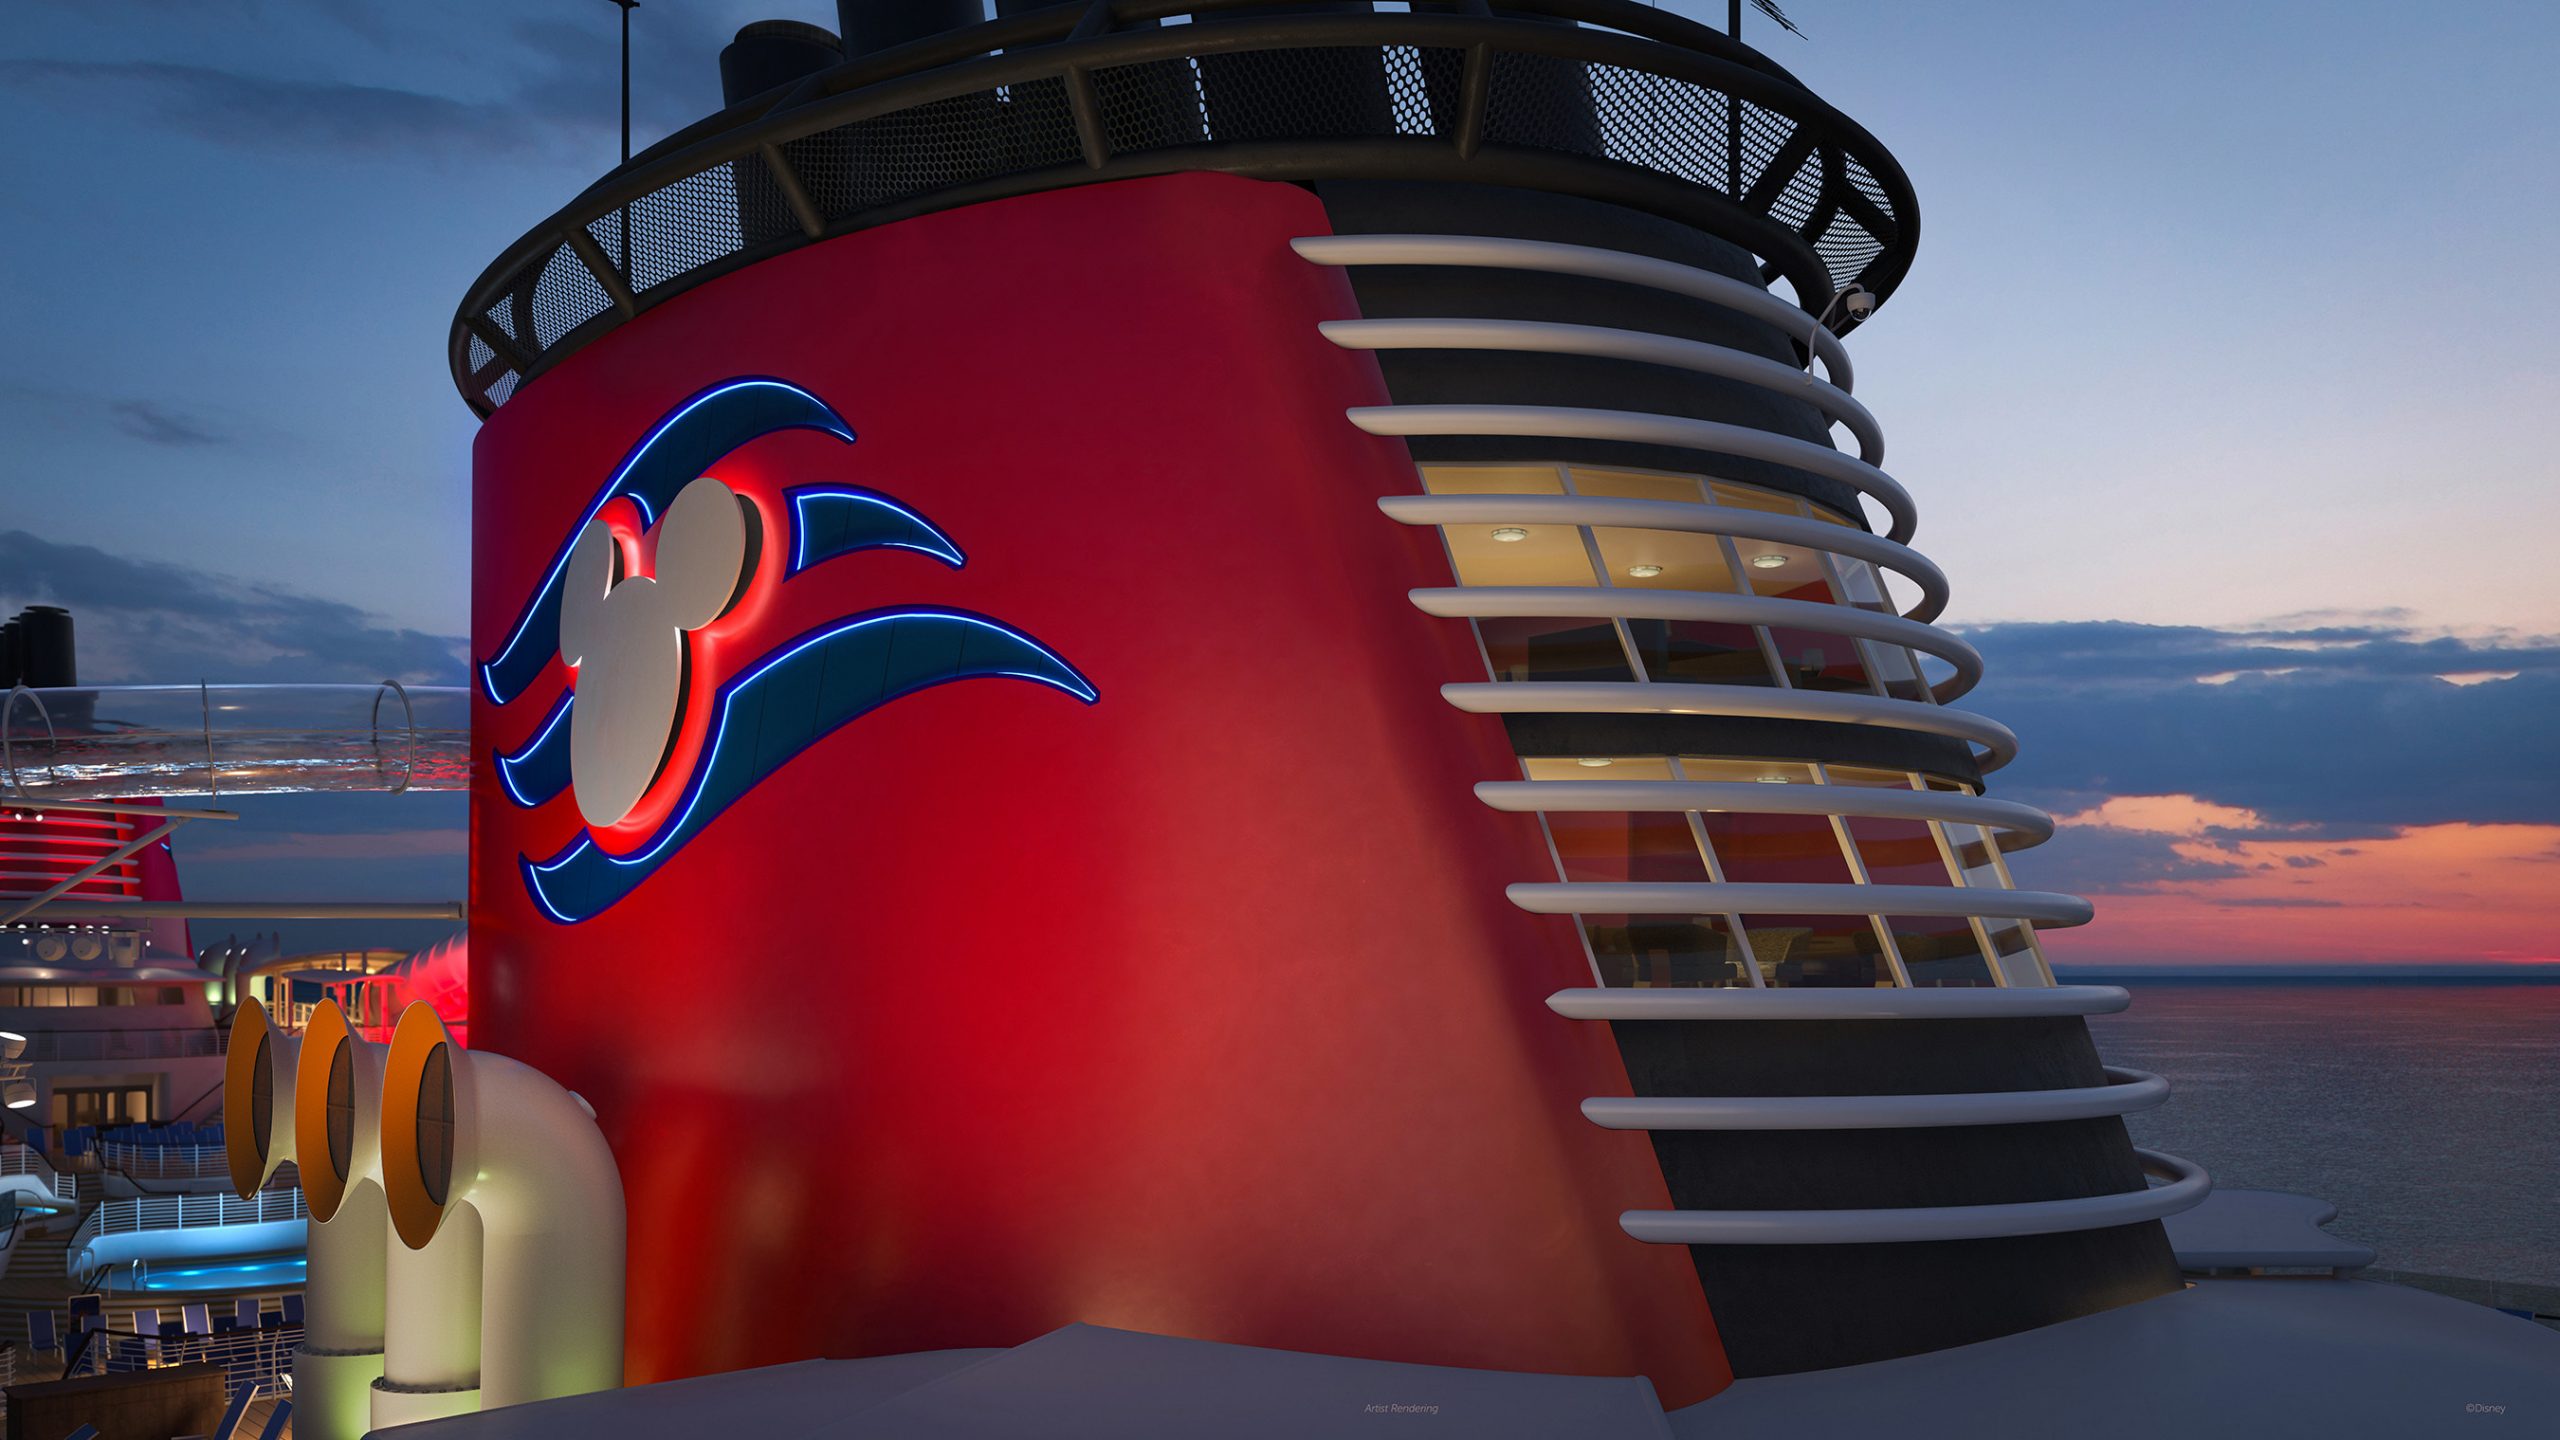 Disney Cruise Line’s new, eye-popping funnel penthouse suite is the first of its kind